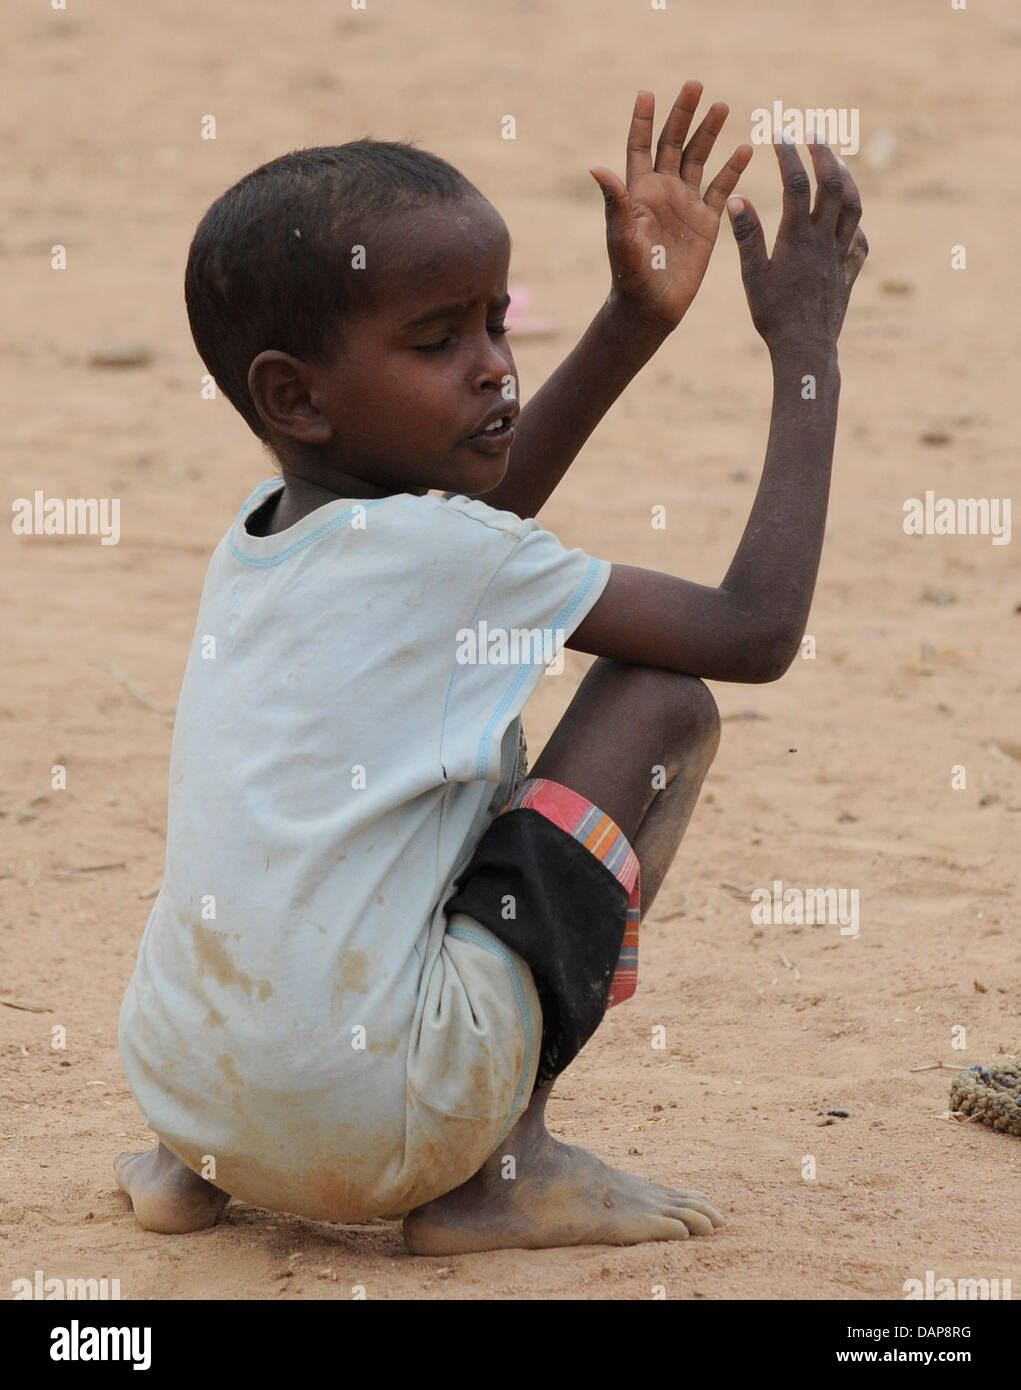 A little somalian raising his hands in a refugee camp in Dadaab, northeastern Kenya on Tuesday, August 2nd 2011. Somalia and parts of Kenya have been struck by one of the worst droughts and famines in six decades, more than 350.000 refugees have found shelter in the worlds biggest refugee camp. Foto: Boris Roessler dpa  +++(c) dpa - Bildfunk+++ Stock Photo